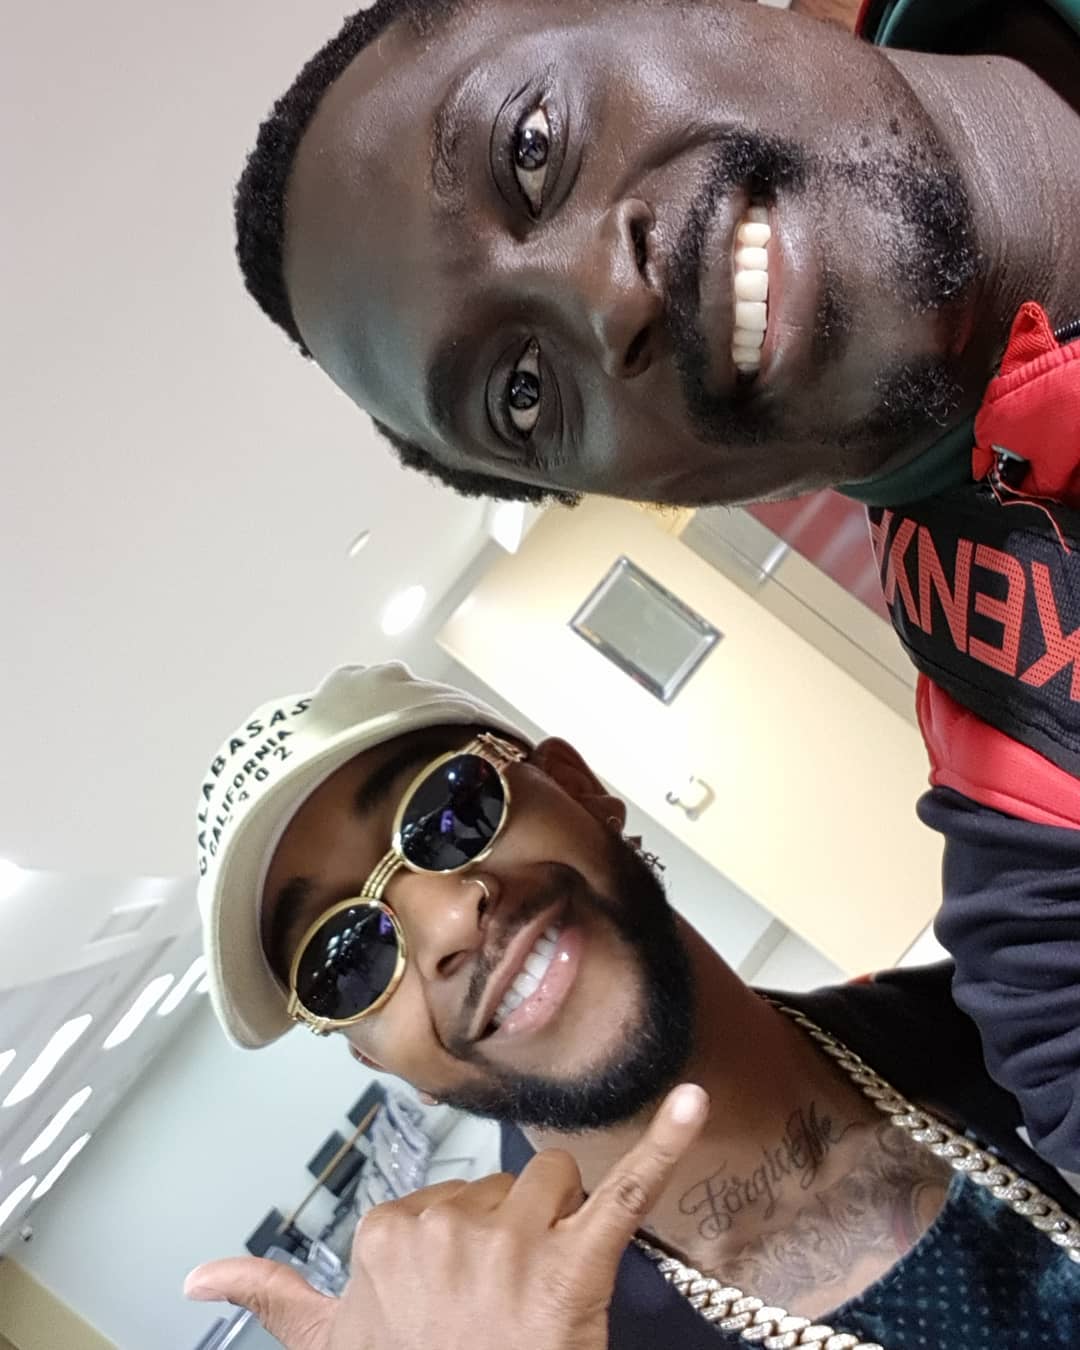 2018-04-03-Collins Injera: Is Hanging Out With Omarion From The USA